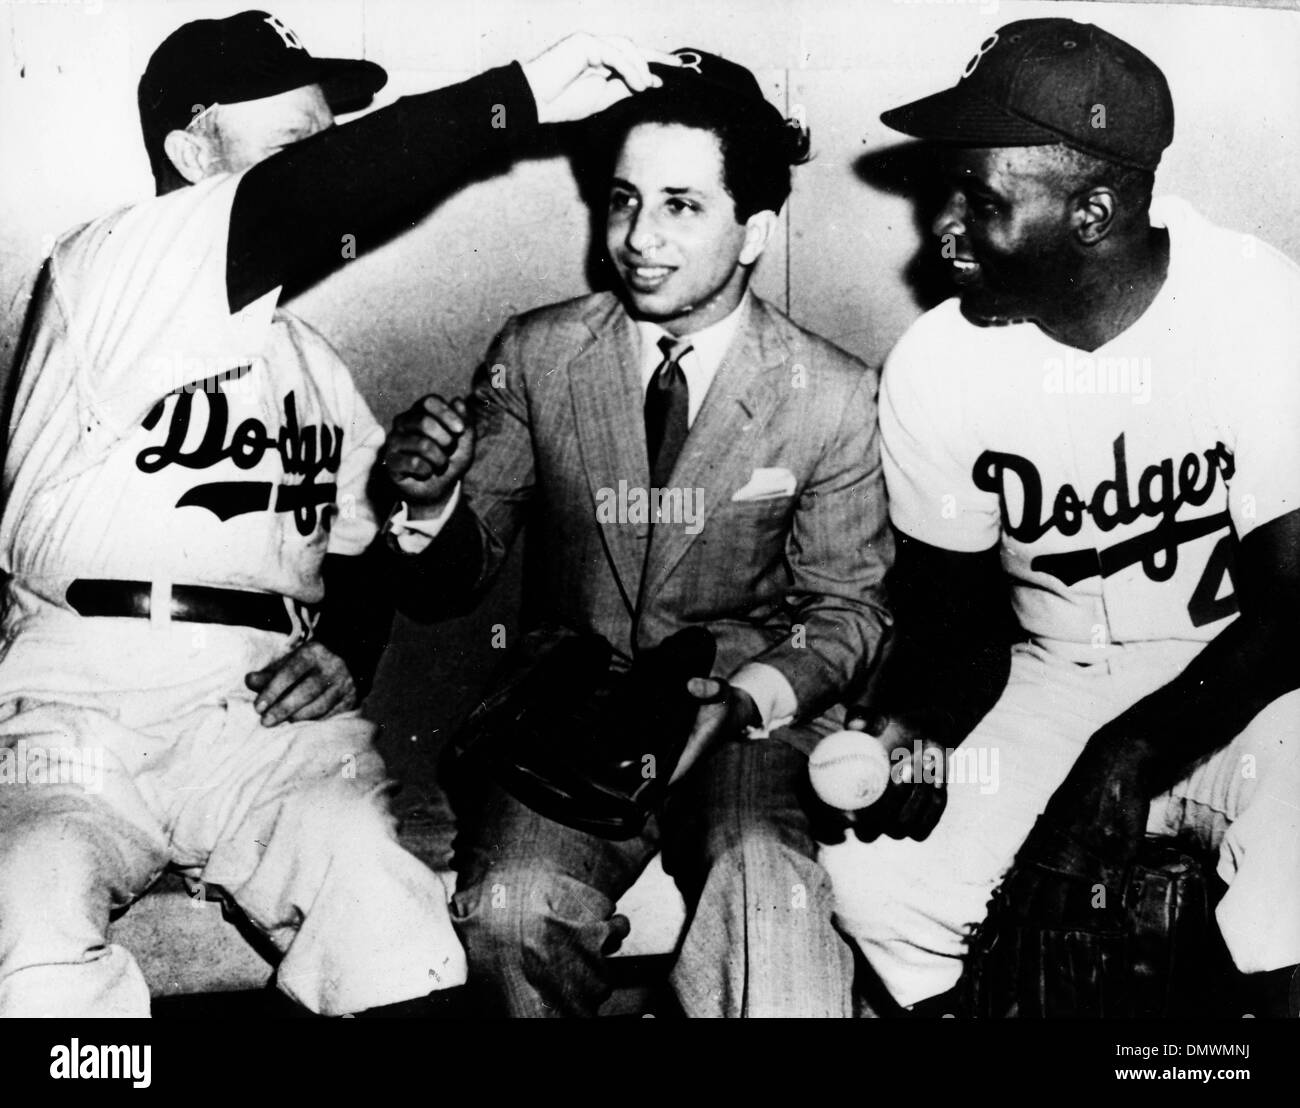 Aug. 18, 1952 - New York, NY, U.S. - King FAISAL II of Iraq attends a baseball game and is welcomed into the dugout. PICTURED: Faisal with Dodgers players JACKIE ROBINSON and manager CHARLES DRESSEN.  (Credit Image: © KEYSTONE Pictures USA/ZUMAPRESS.com) Stock Photo